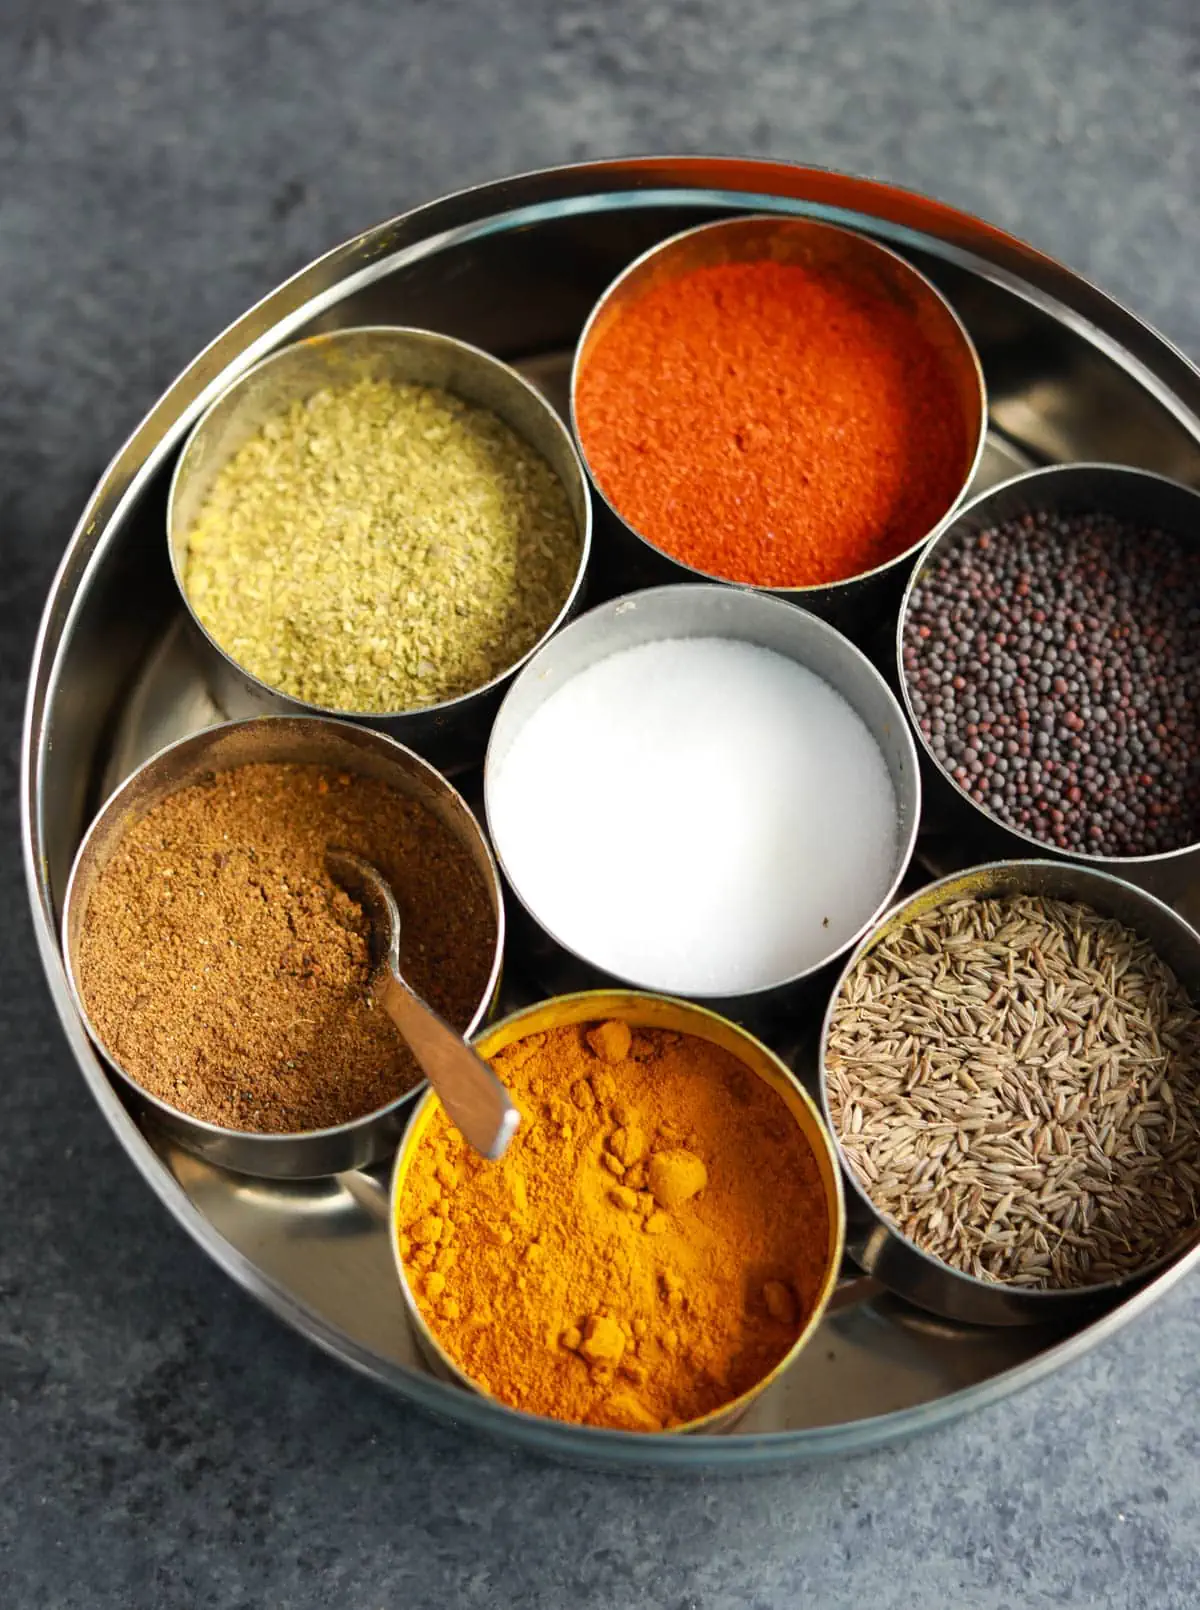 Spices nicely organized in an indian spice box, called masala dabba